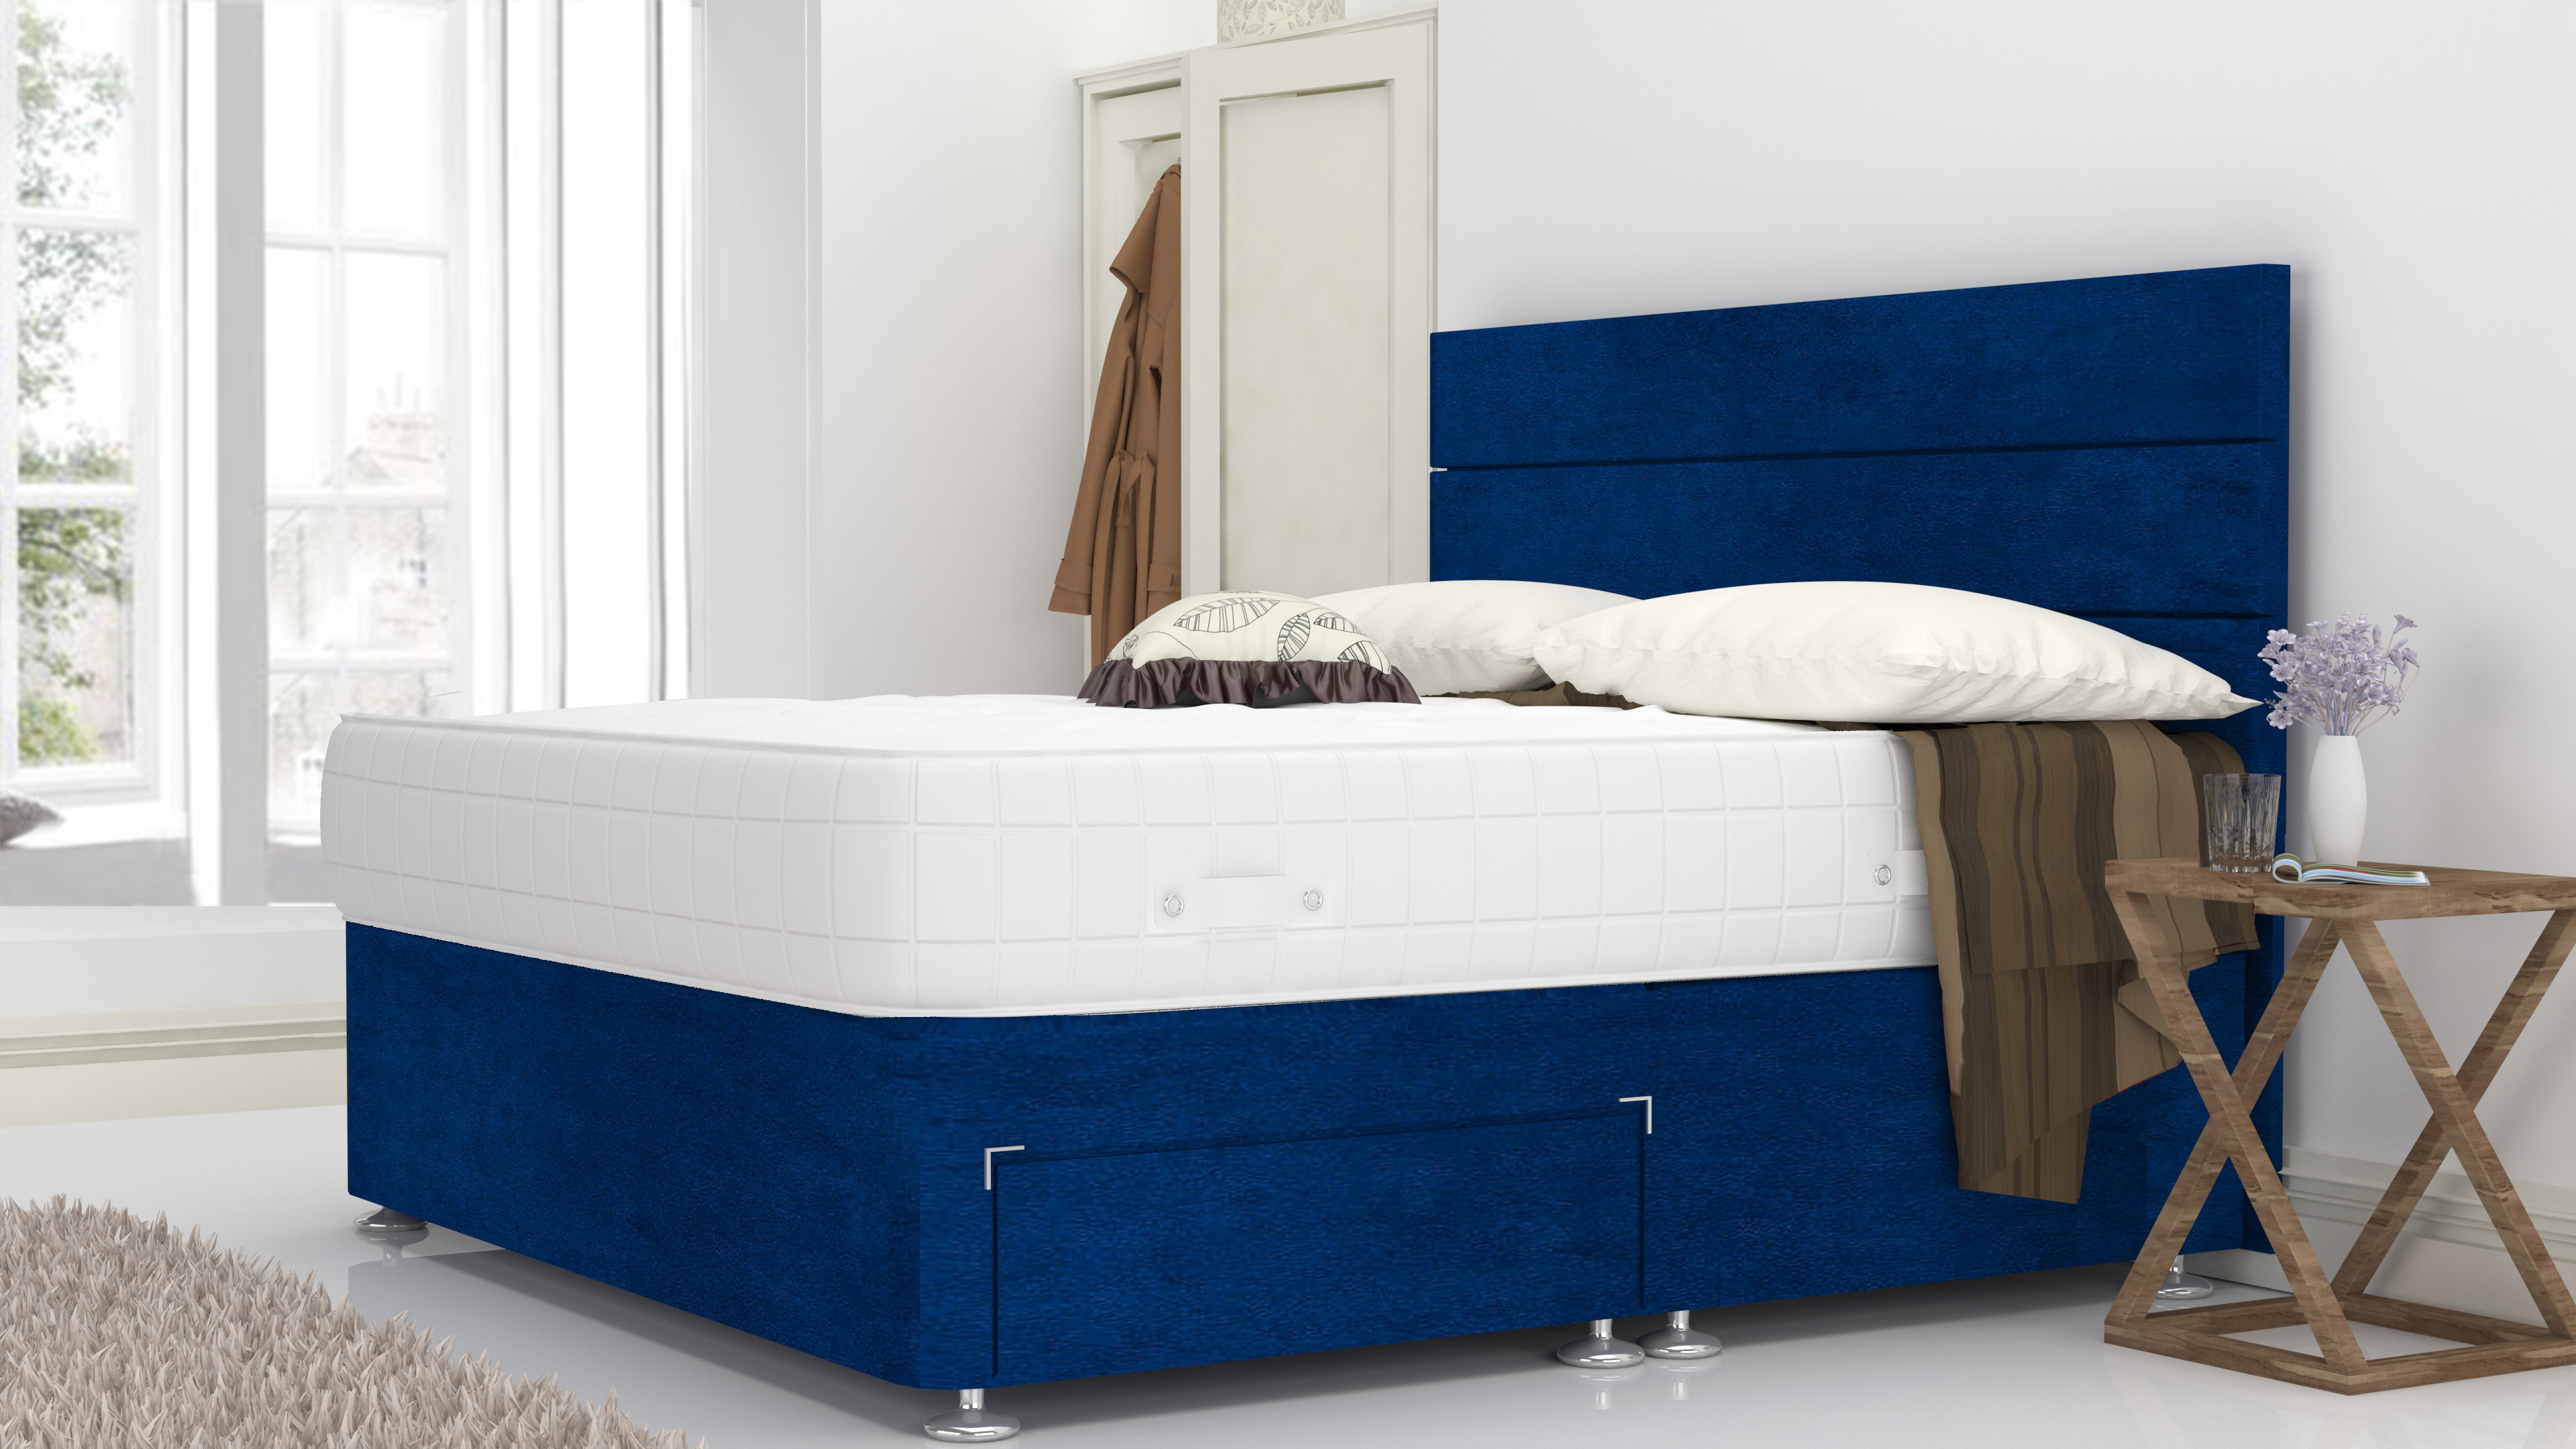 Blue Plush 4 Feet Divan Bed Set With 3 Panel Headboard (Included Feet) And Free Pillow Top Mattress